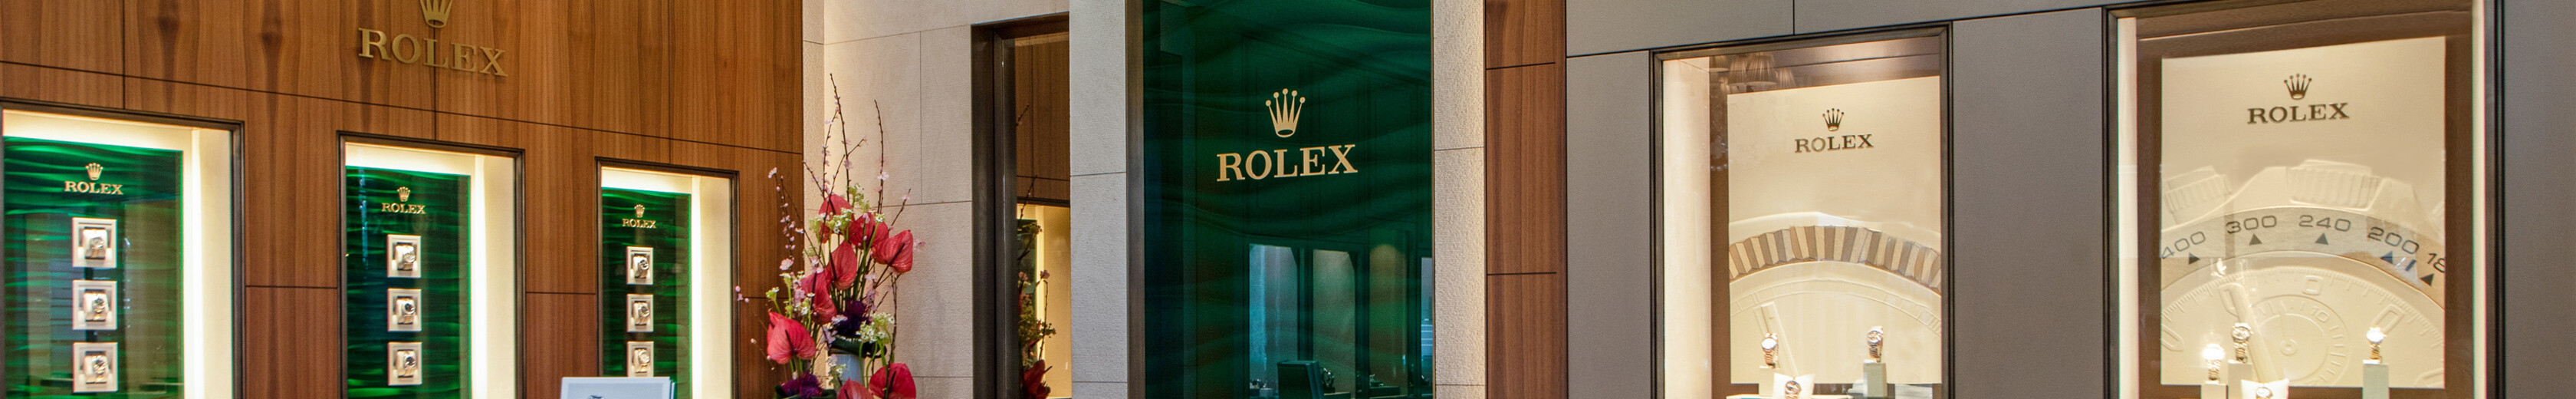 Rolex watches at Ferret in NICE